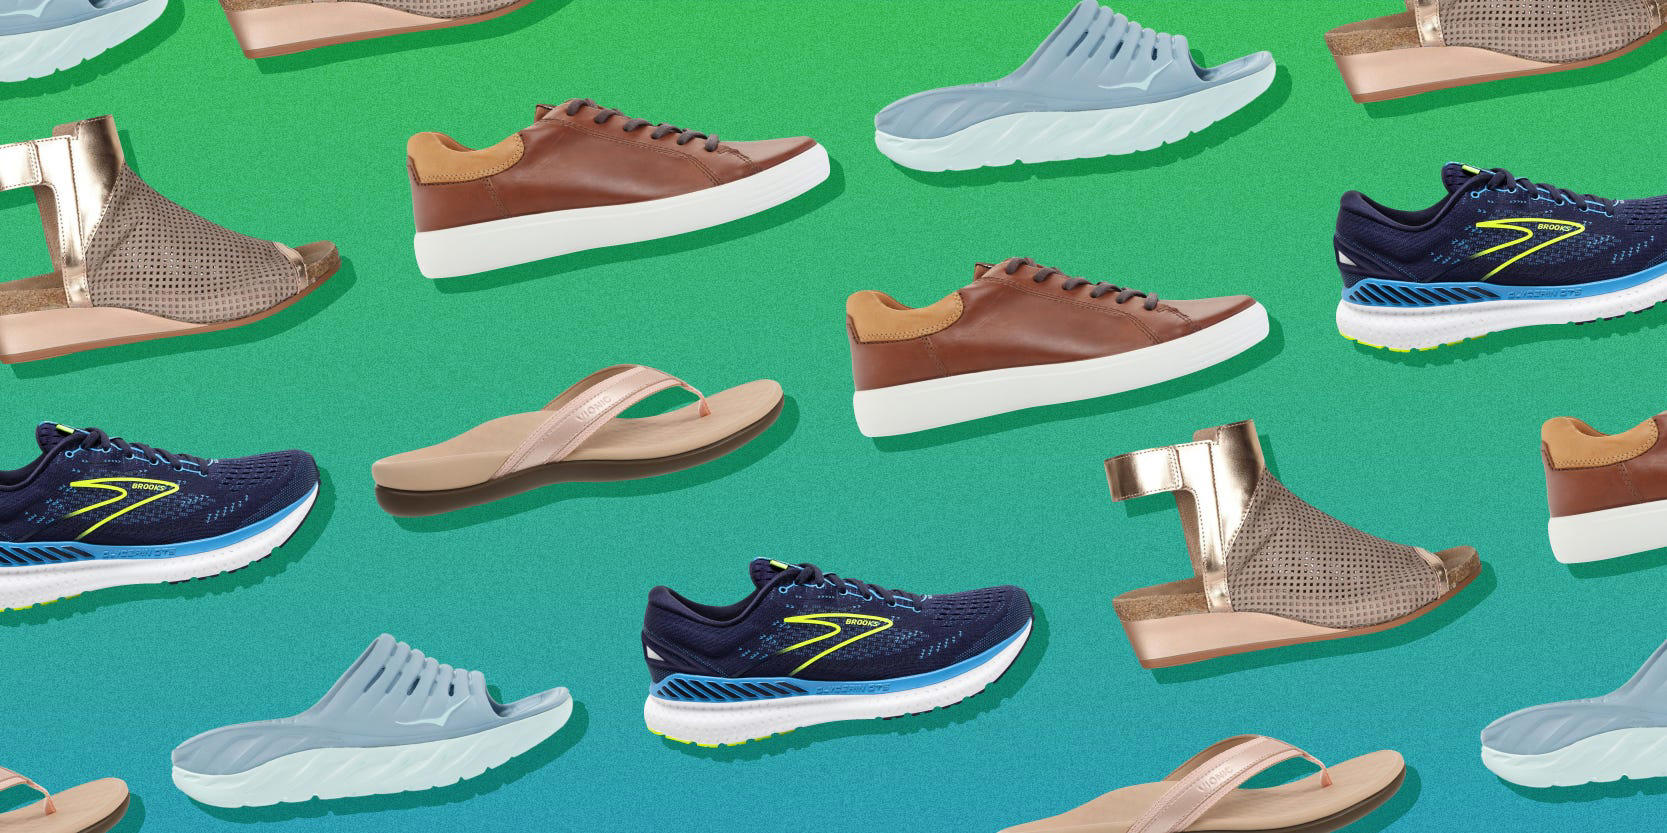 The 7 best shoes for plantar fasciitis in 2023